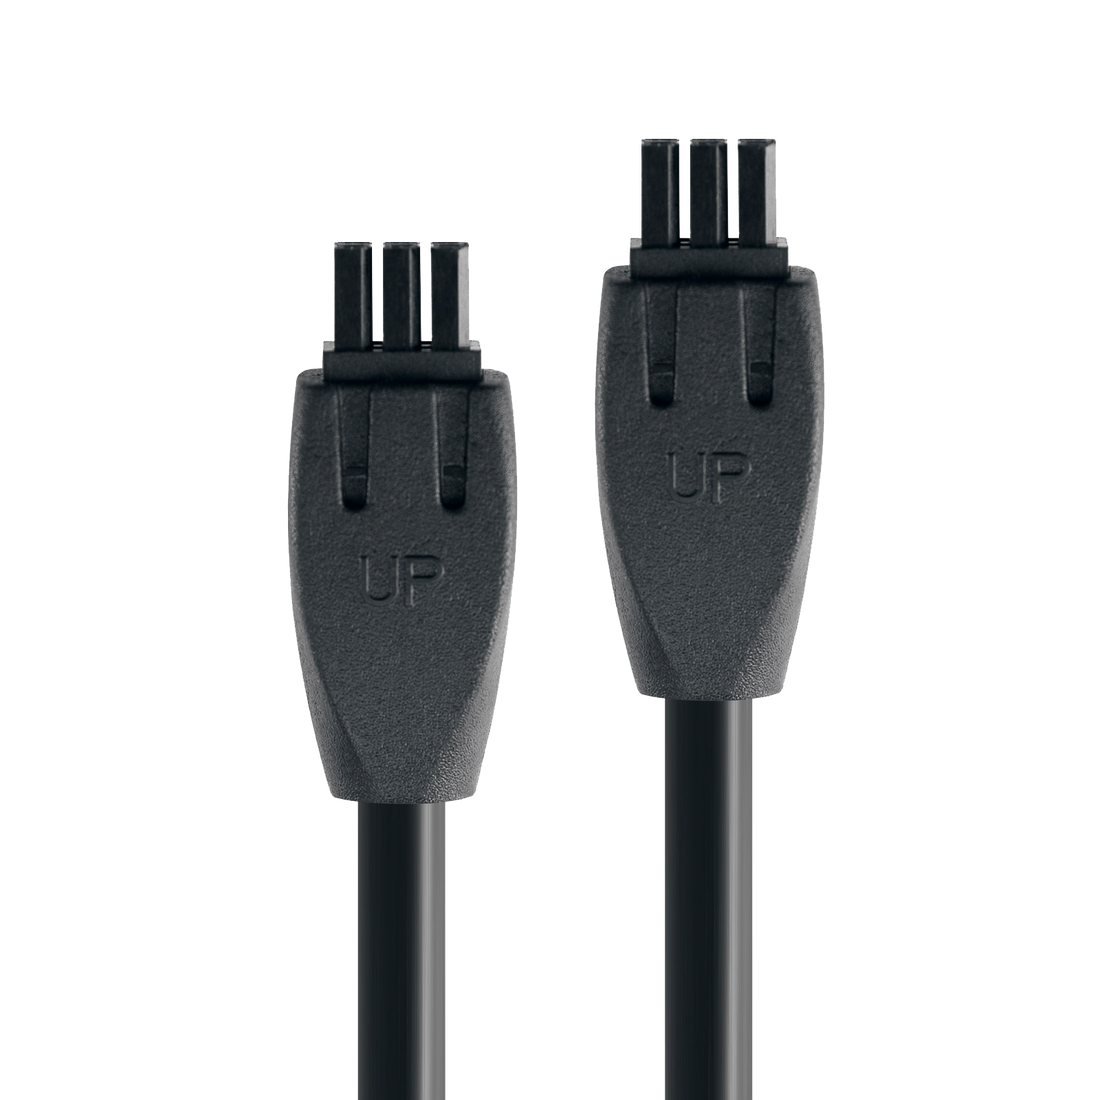 Cable E10/E25 Compatible with the Exclaim and Luna speaker series.